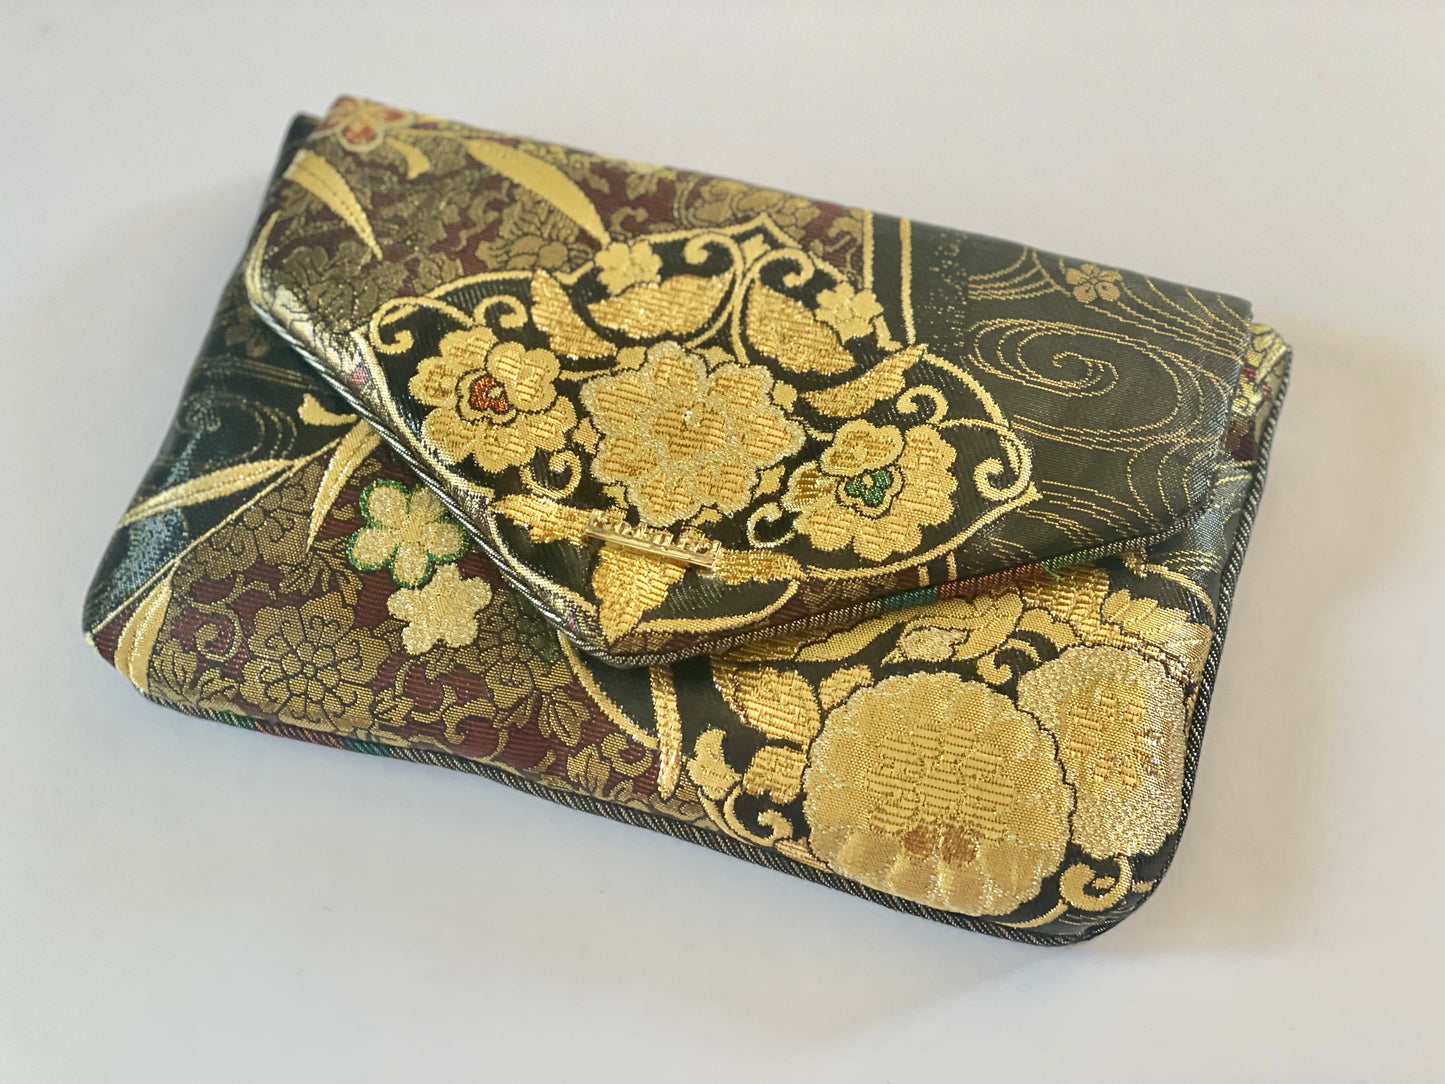 Black and Gold Metallic Floral Clutch